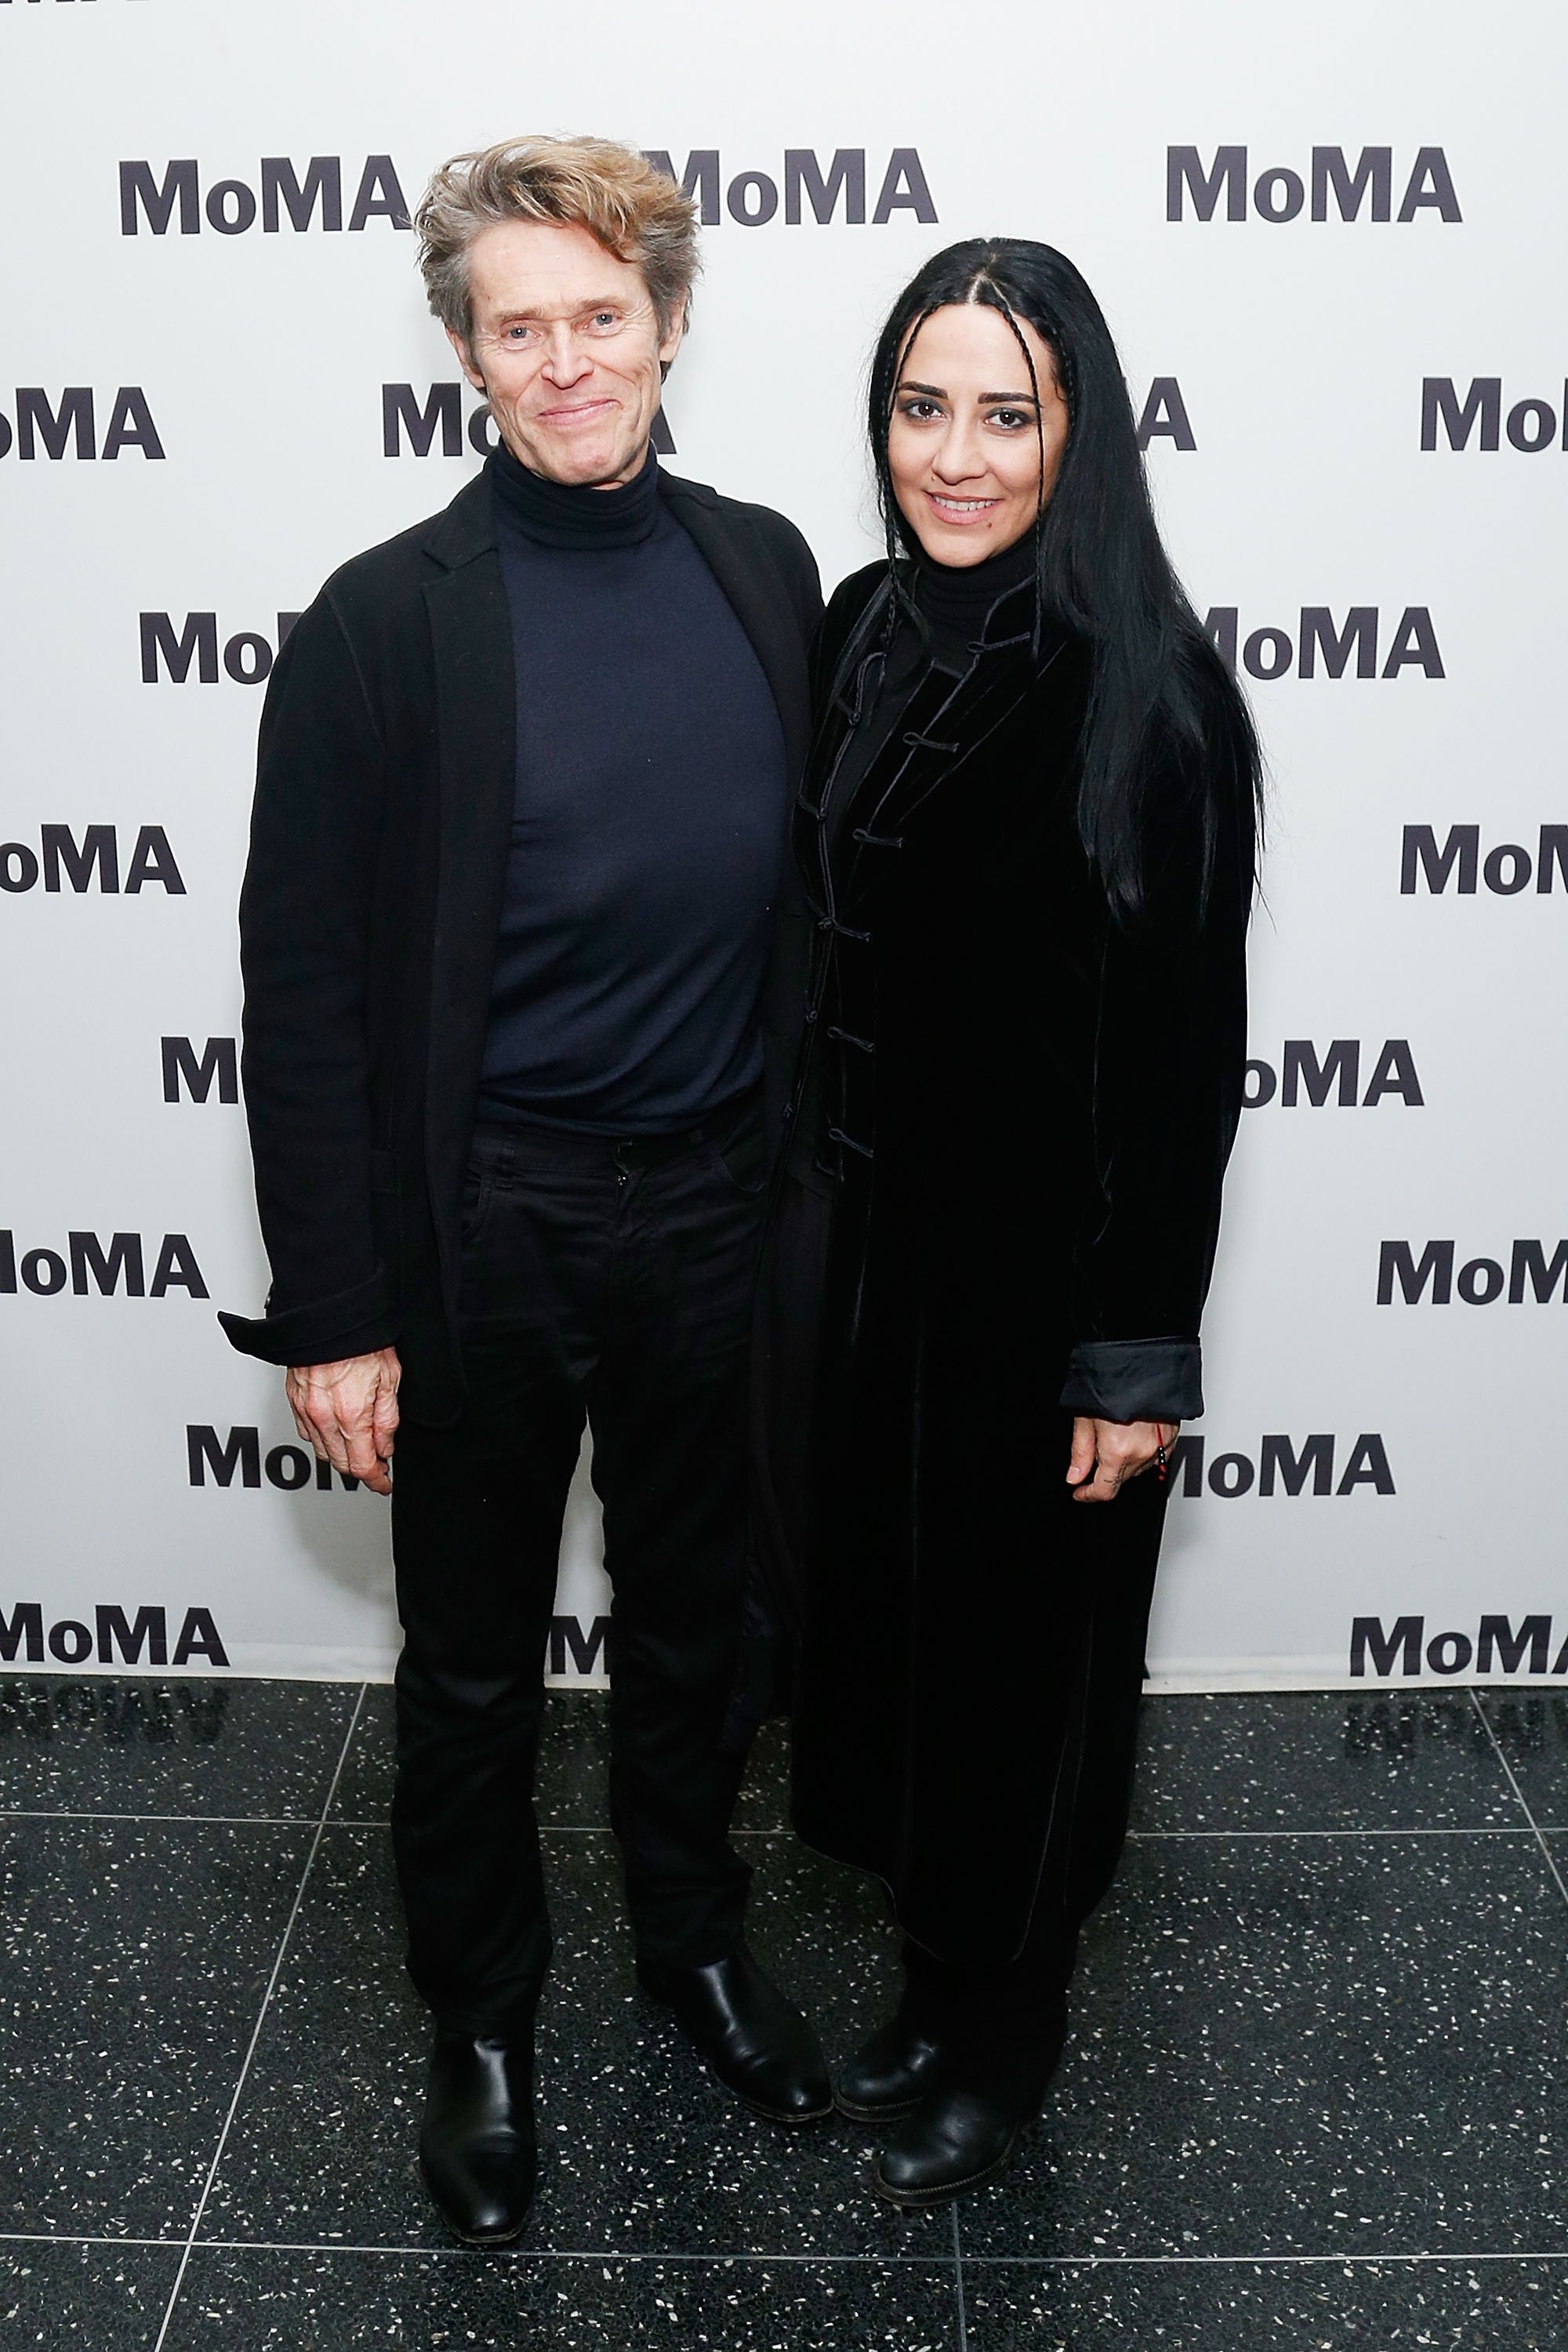 Willem Dafoe and Giada Colagrande during the opening night of the MoMA film series "Abel Ferrara Unrated" at MoMA on May 1, 2019, in New York City. | Source: Getty Images